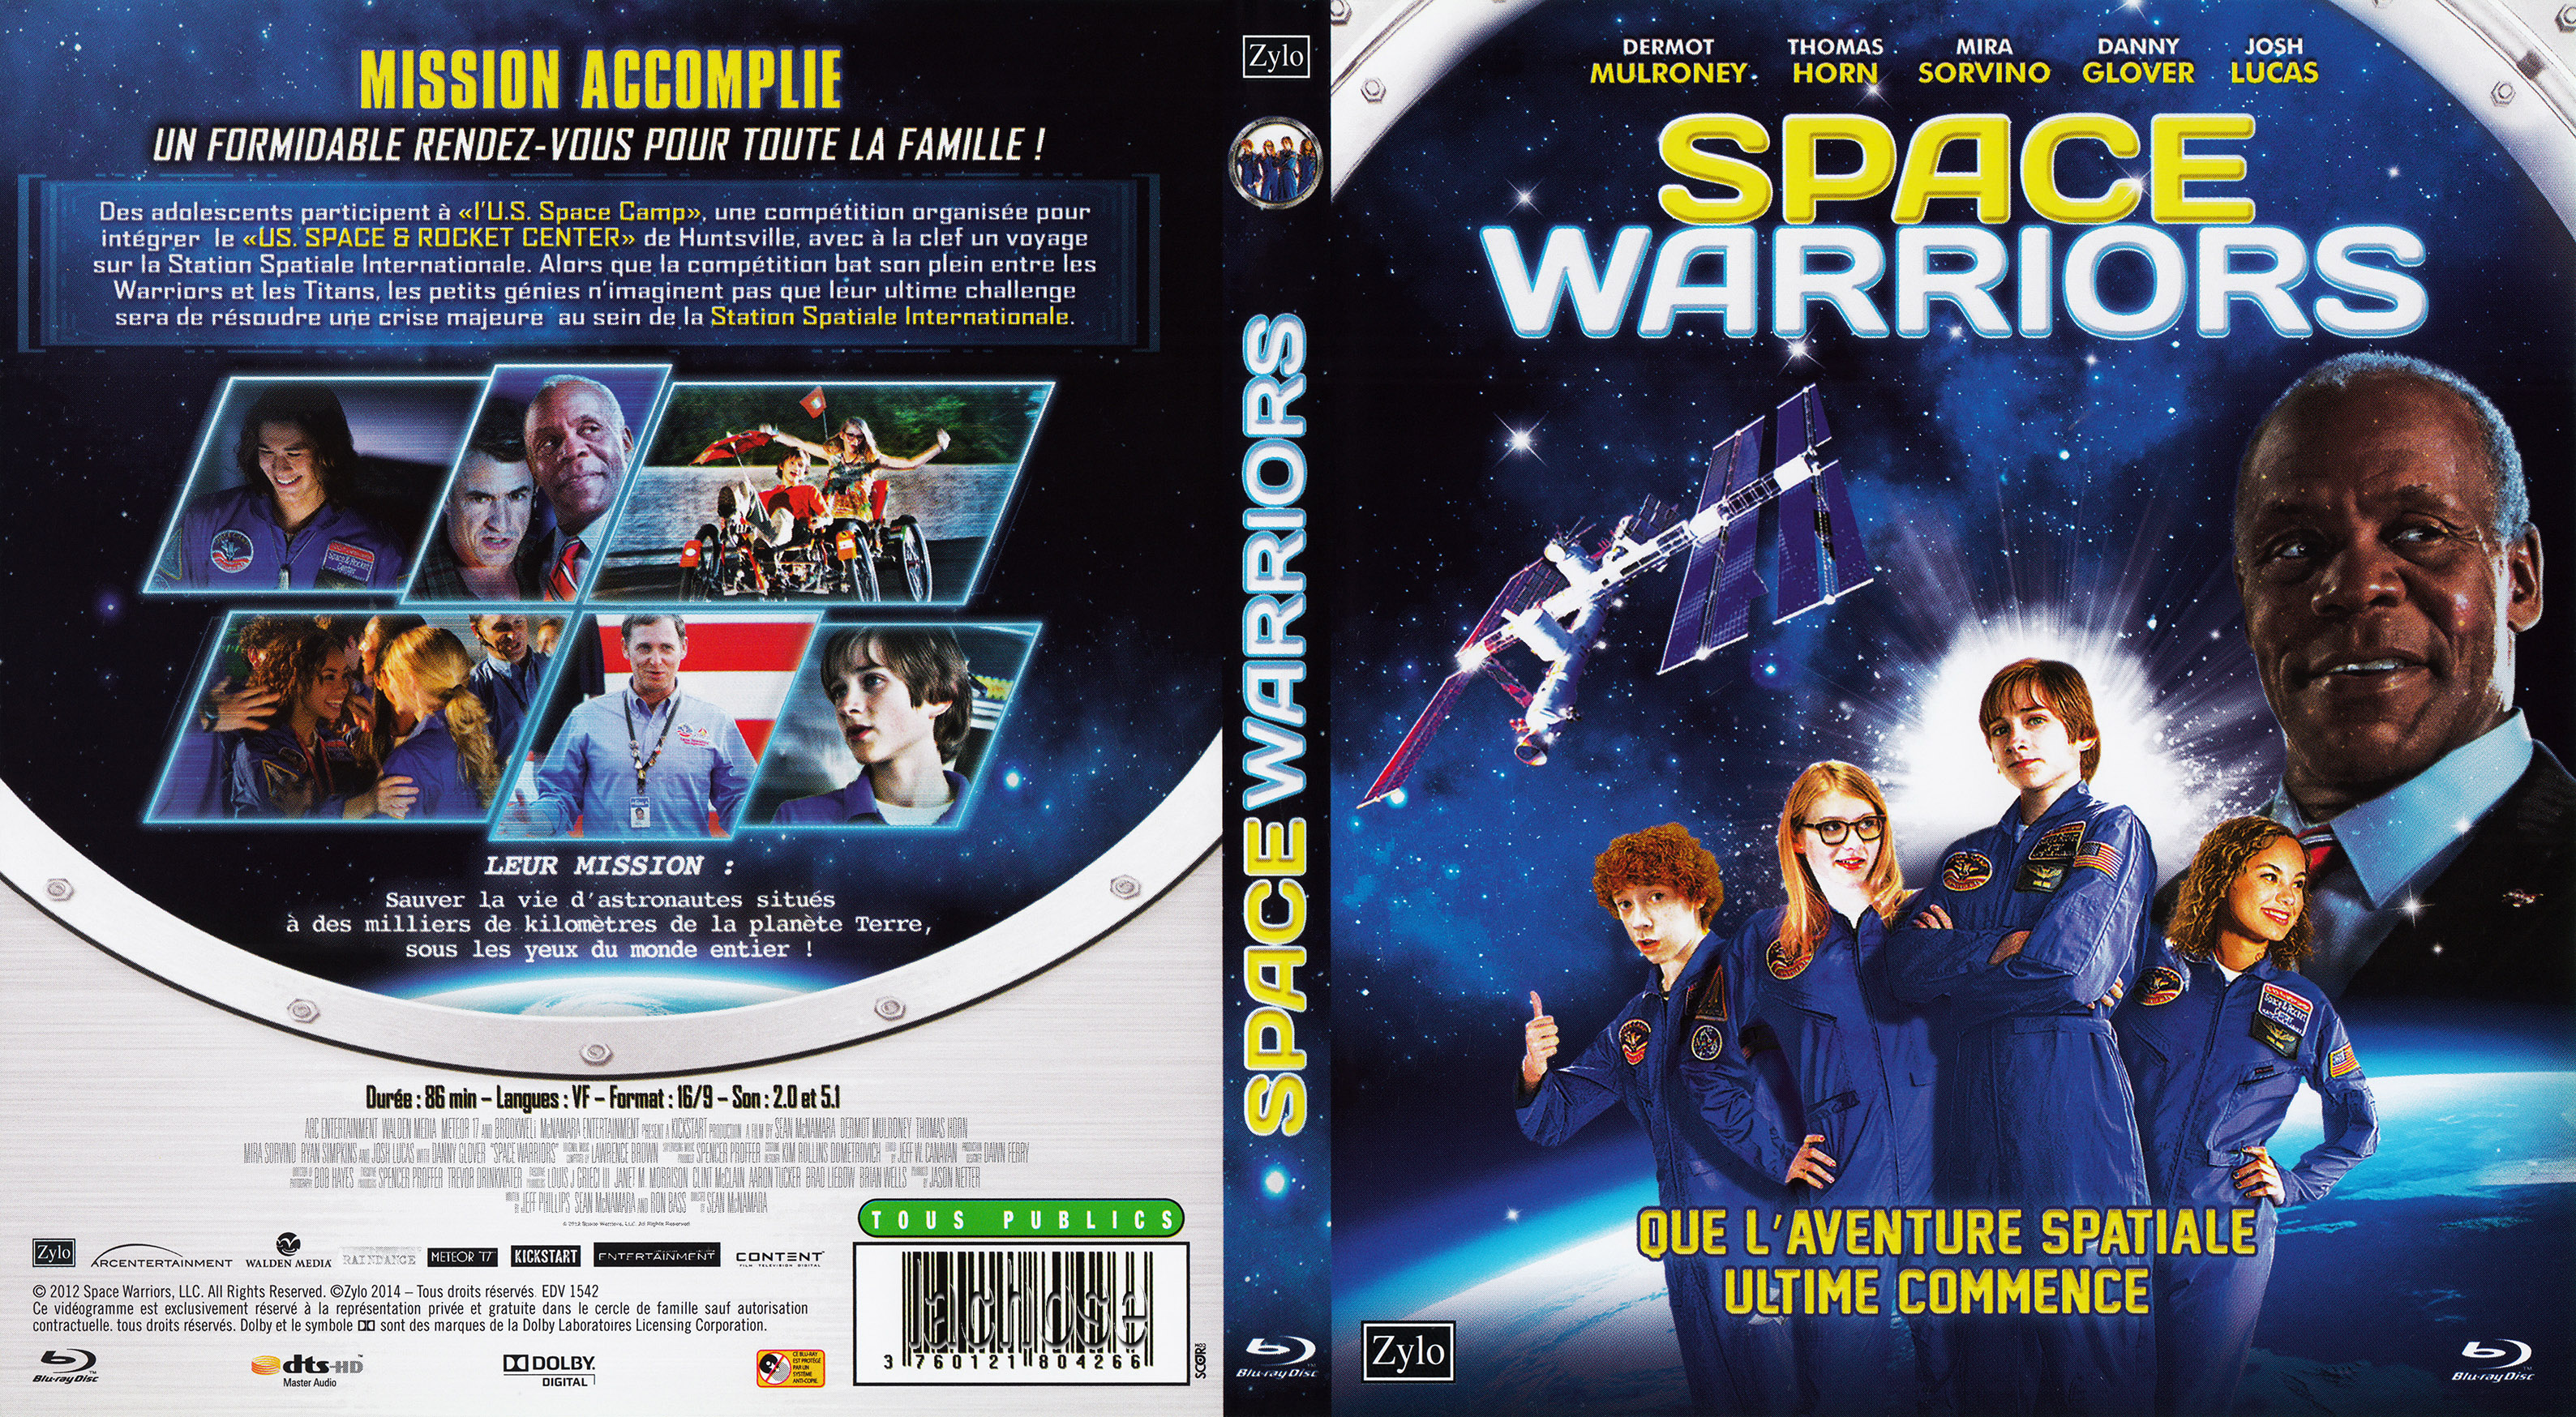 Jaquette DVD Space warriors (BLU-RAY)